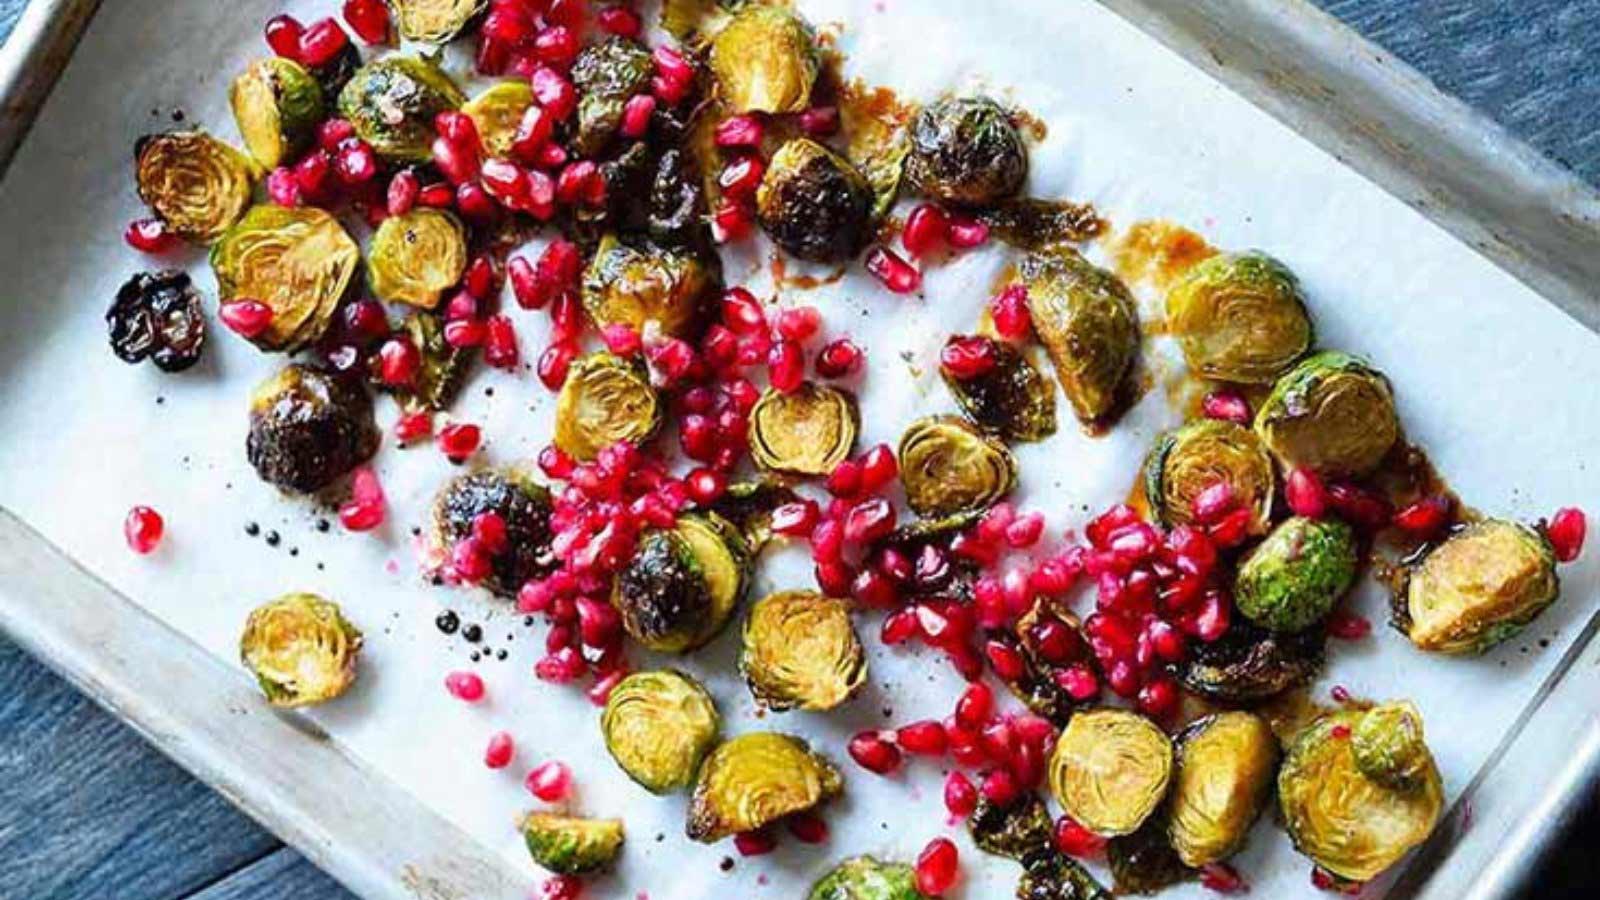 Flavors of the Season: Nutritious and Delicious Holiday Side Dishes